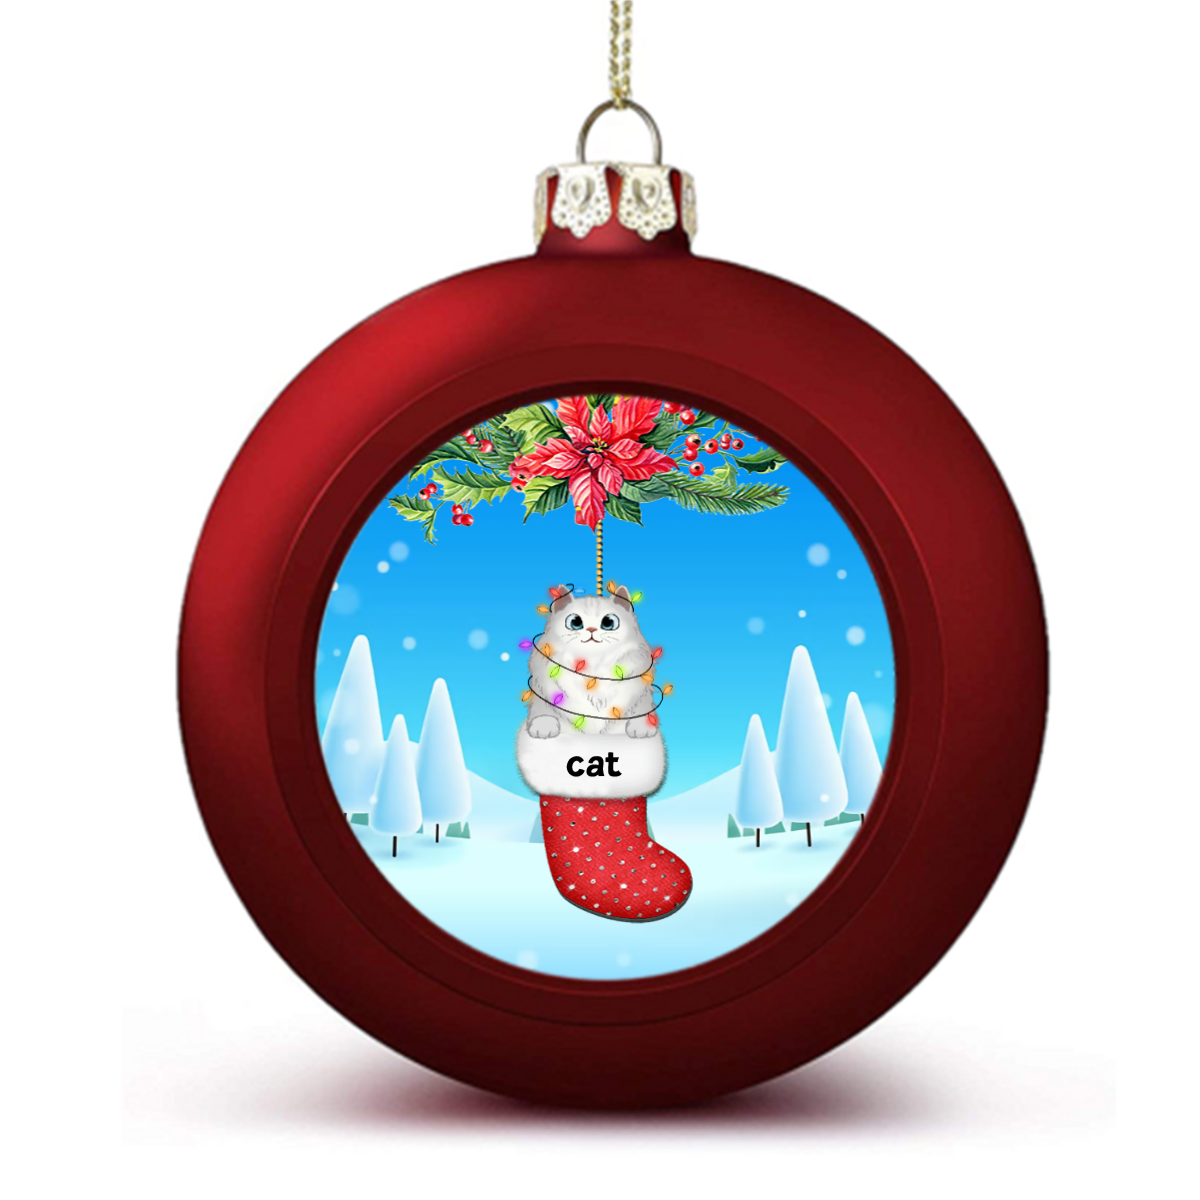 Cats Christmas Stocking Personalized Ball Ornaments